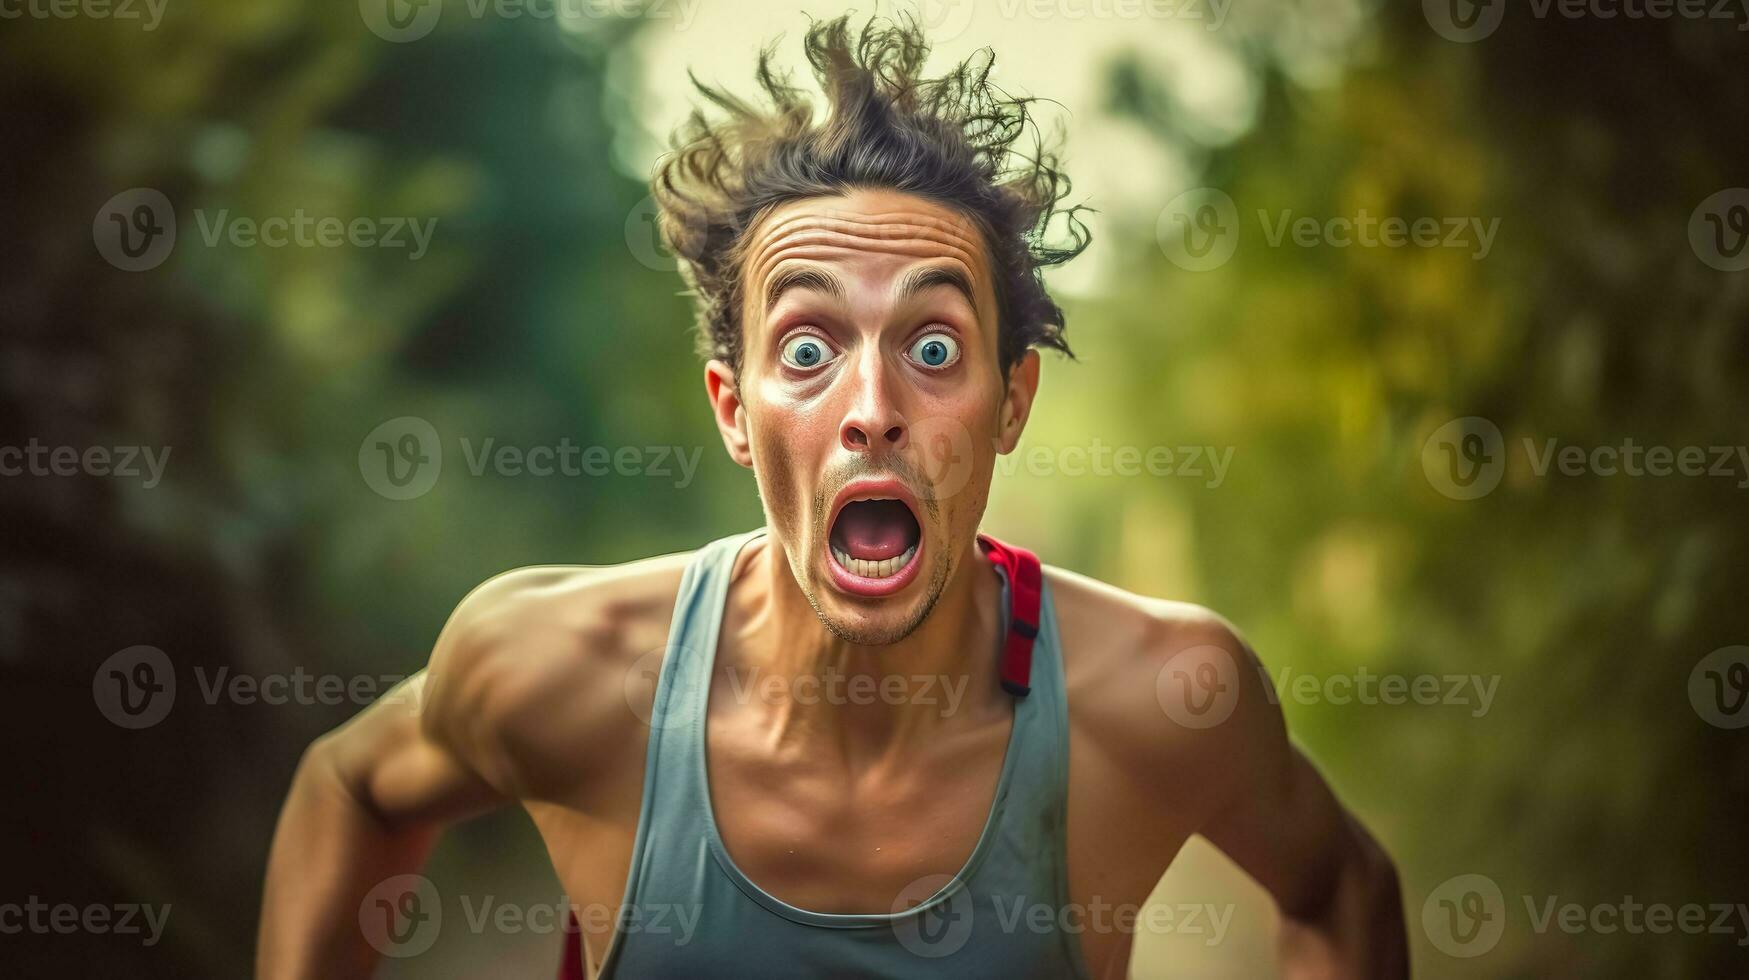 AI Generated runner with a highly exaggerated expression of surprise or shock, his hair windswept, suggesting rapid movement or a sudden stop, against a blurred natural backdrop photo